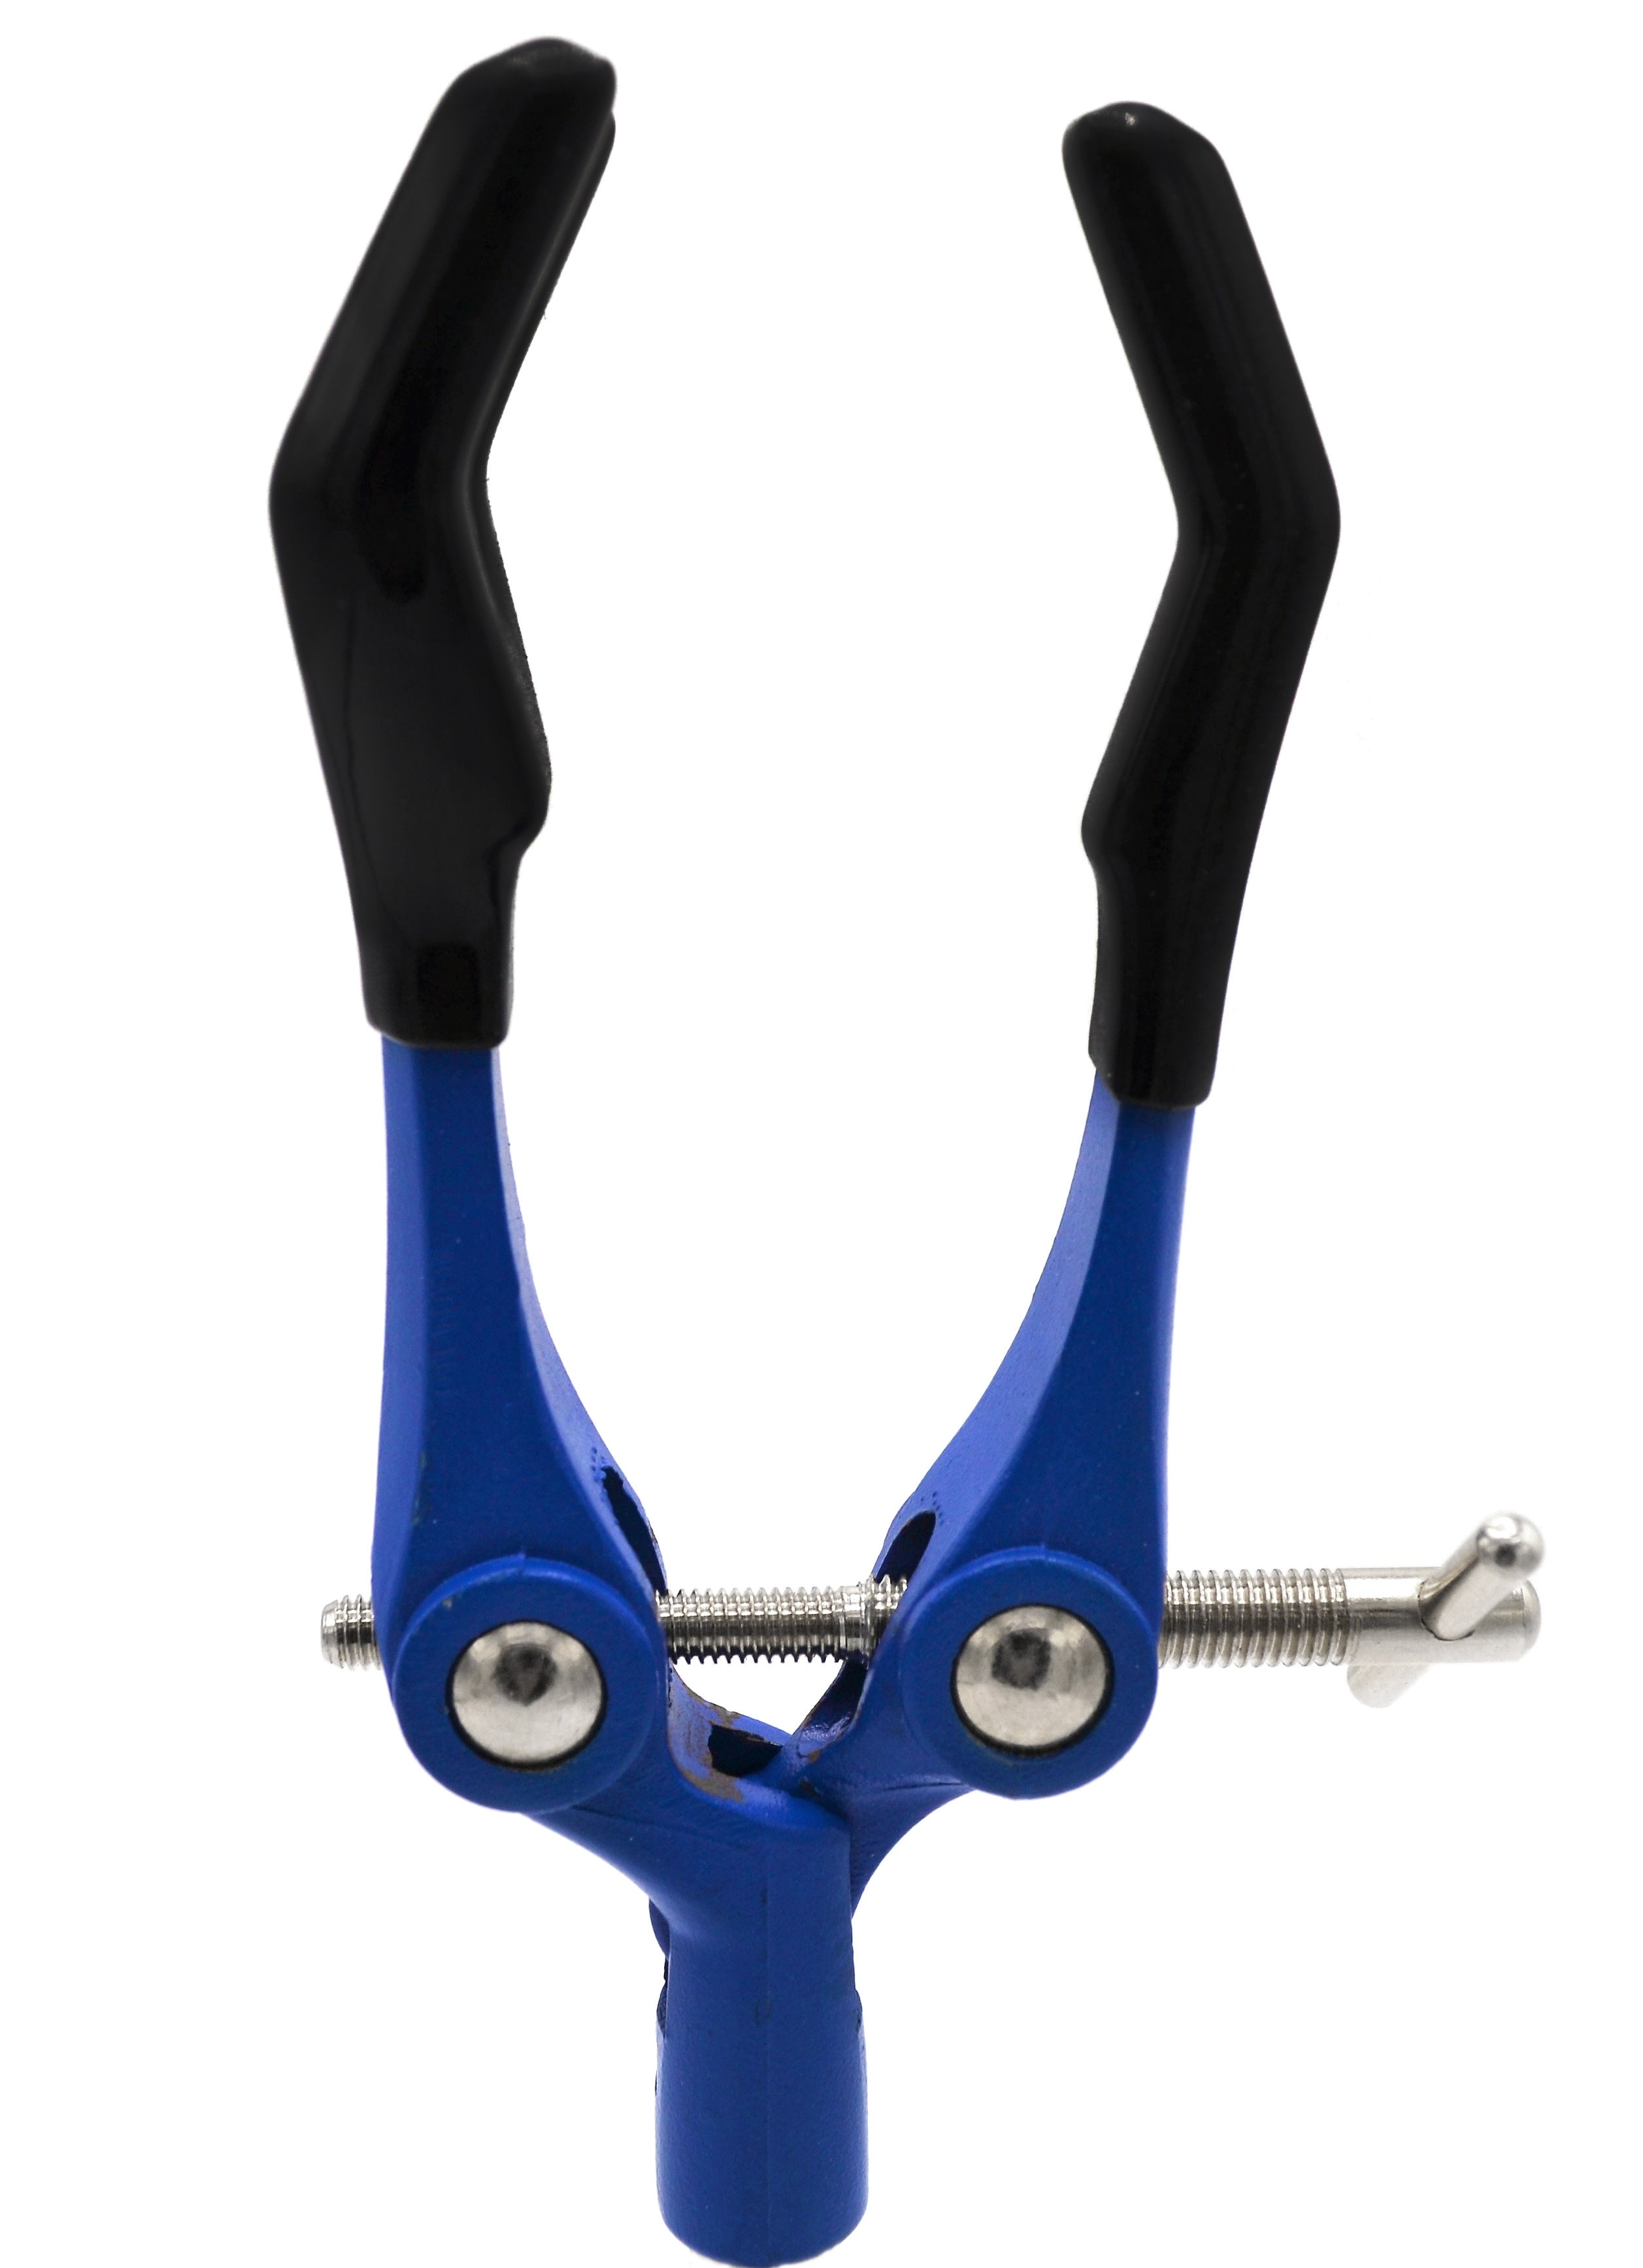 3 Finger, Vinyl Coated Extension Lab Clamp with Boss Head, 3.625" (9.2 cm) maximum clamp opening